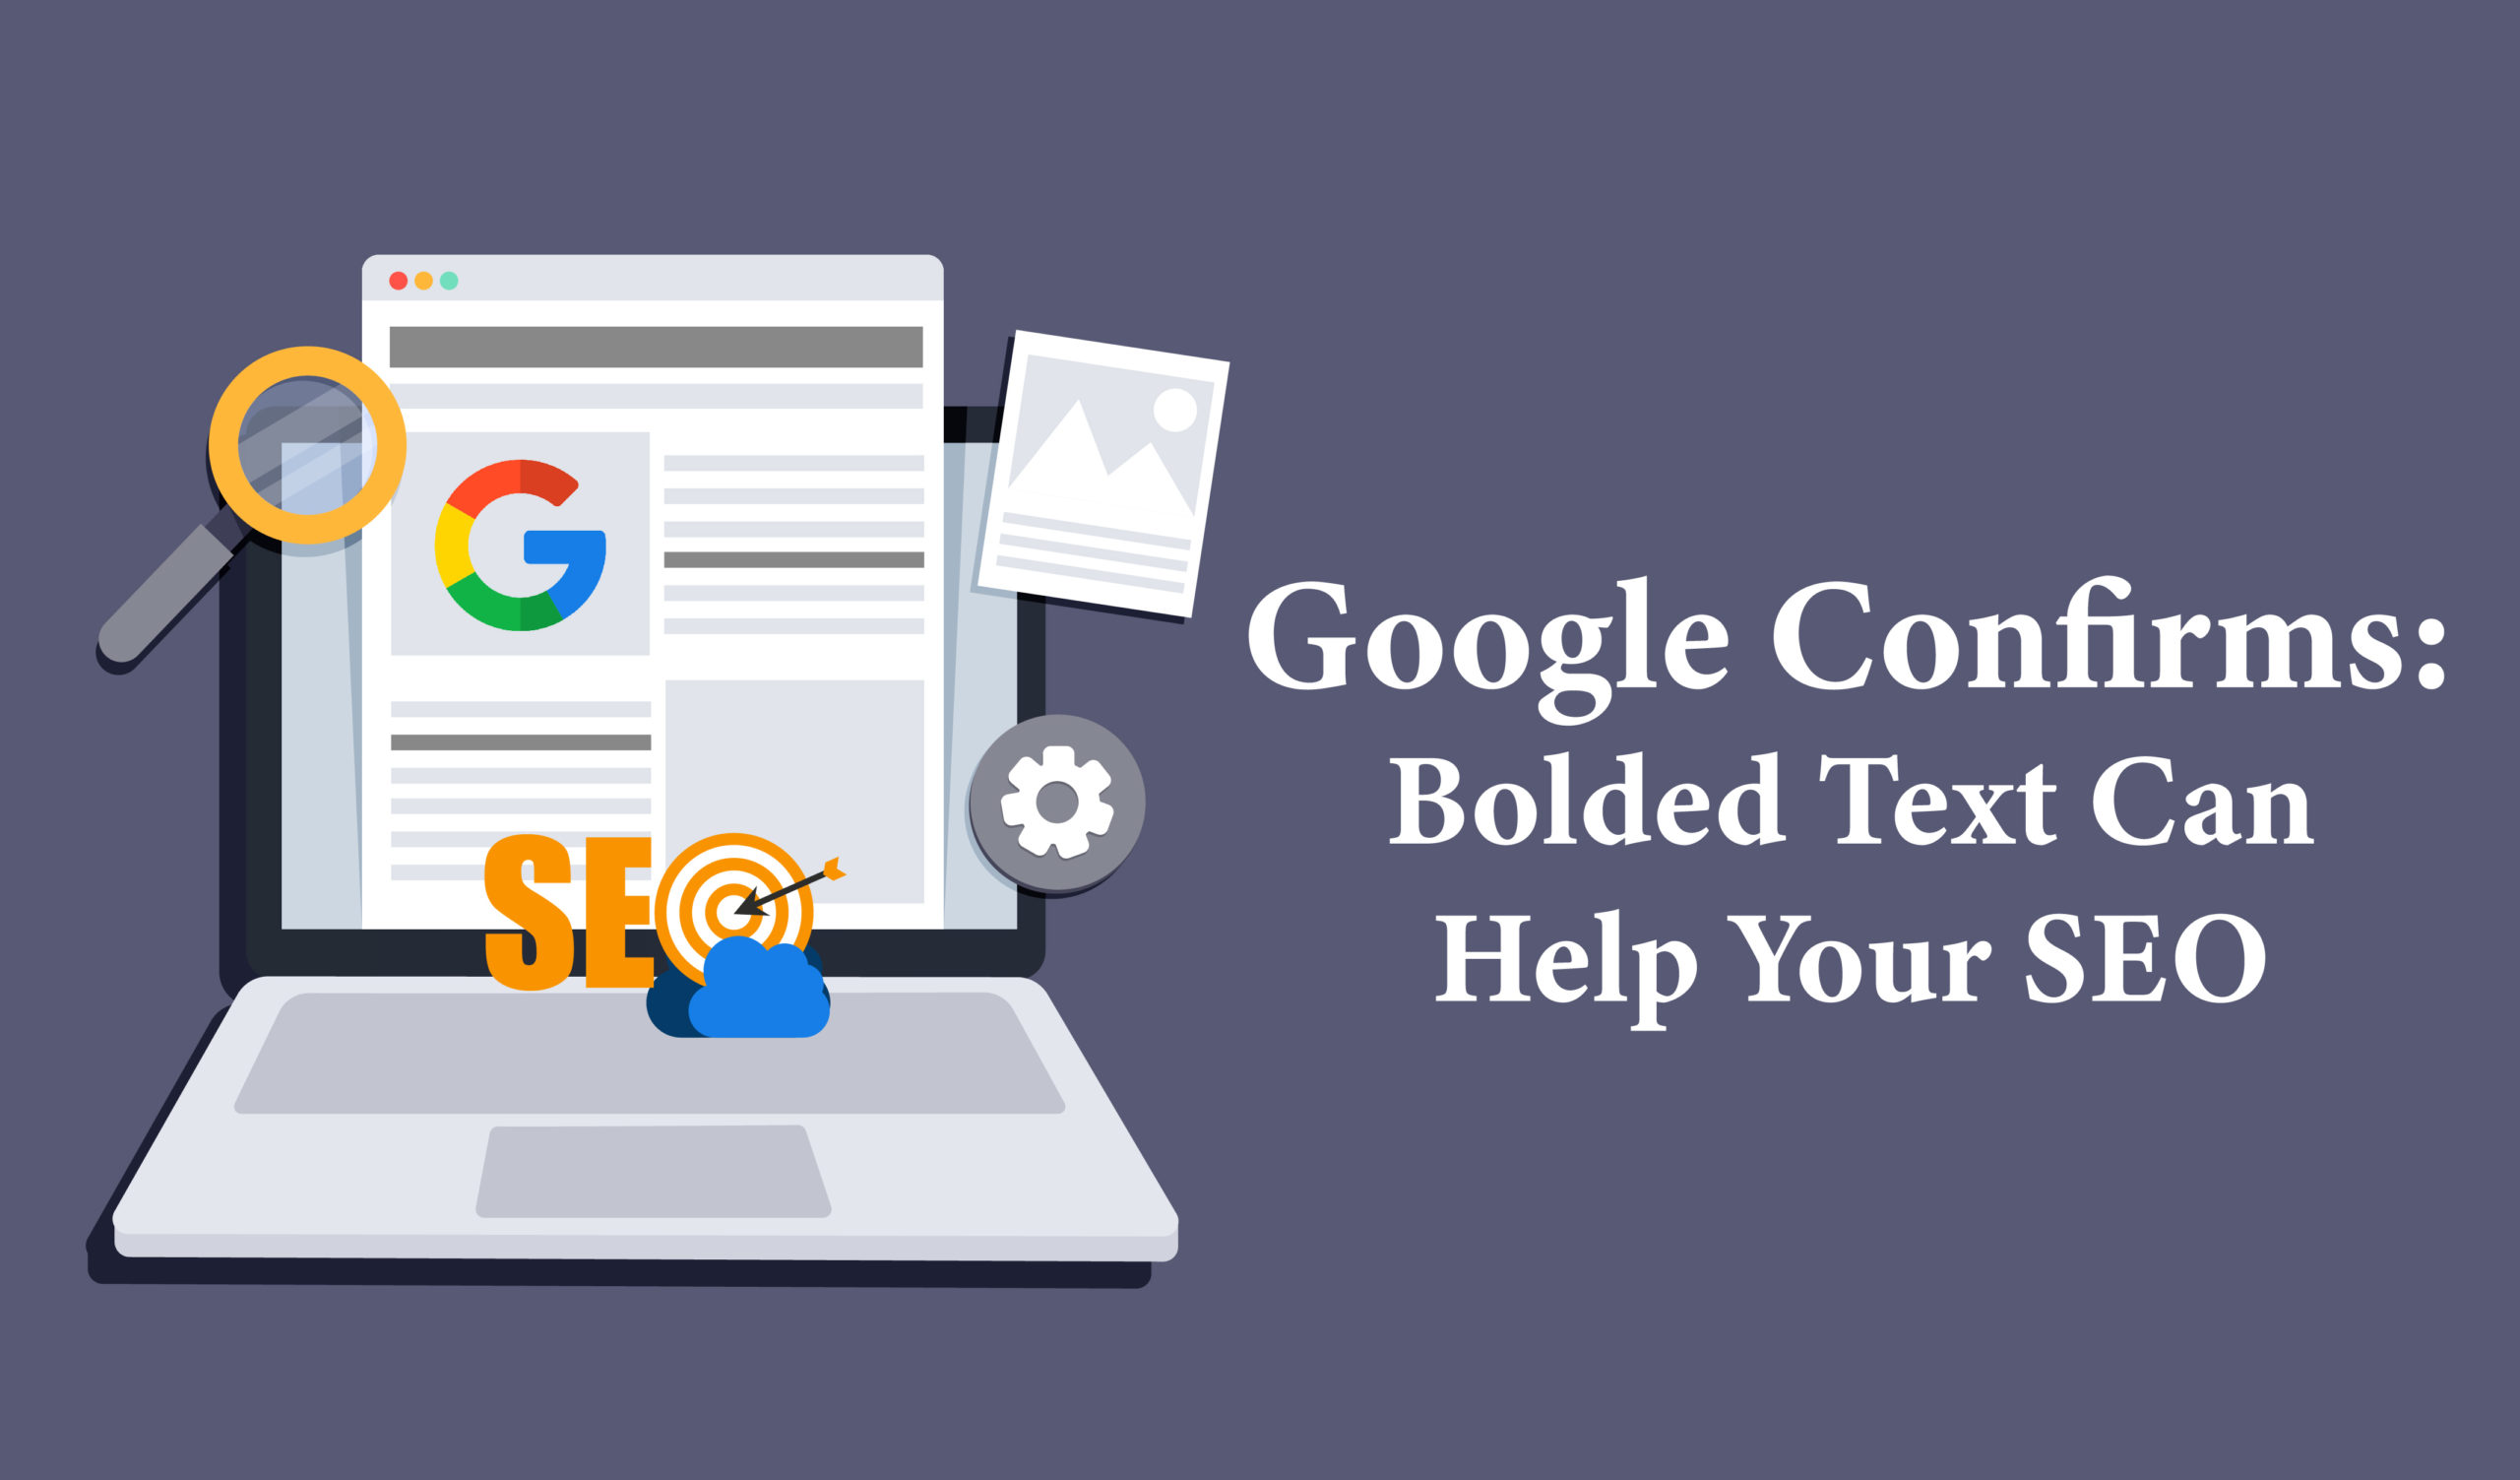 Google confirms: Bolded text can help your SEO